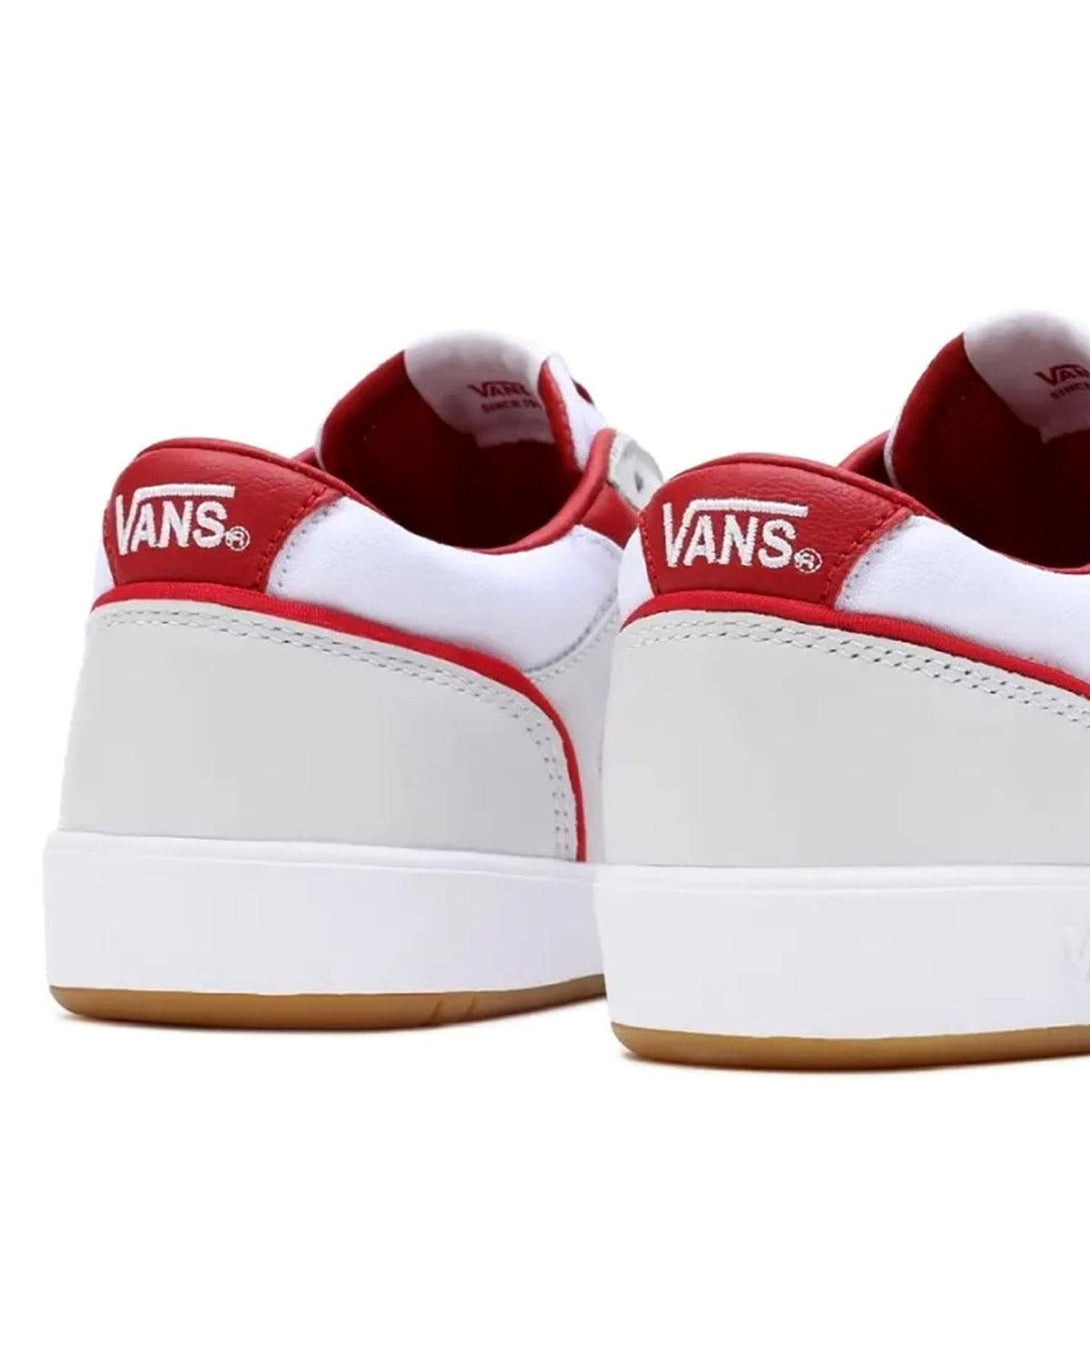 VANS LOWLAND COMFYCUSH JUMP TRAINERS WHITE RED-Designer Outlet Sales